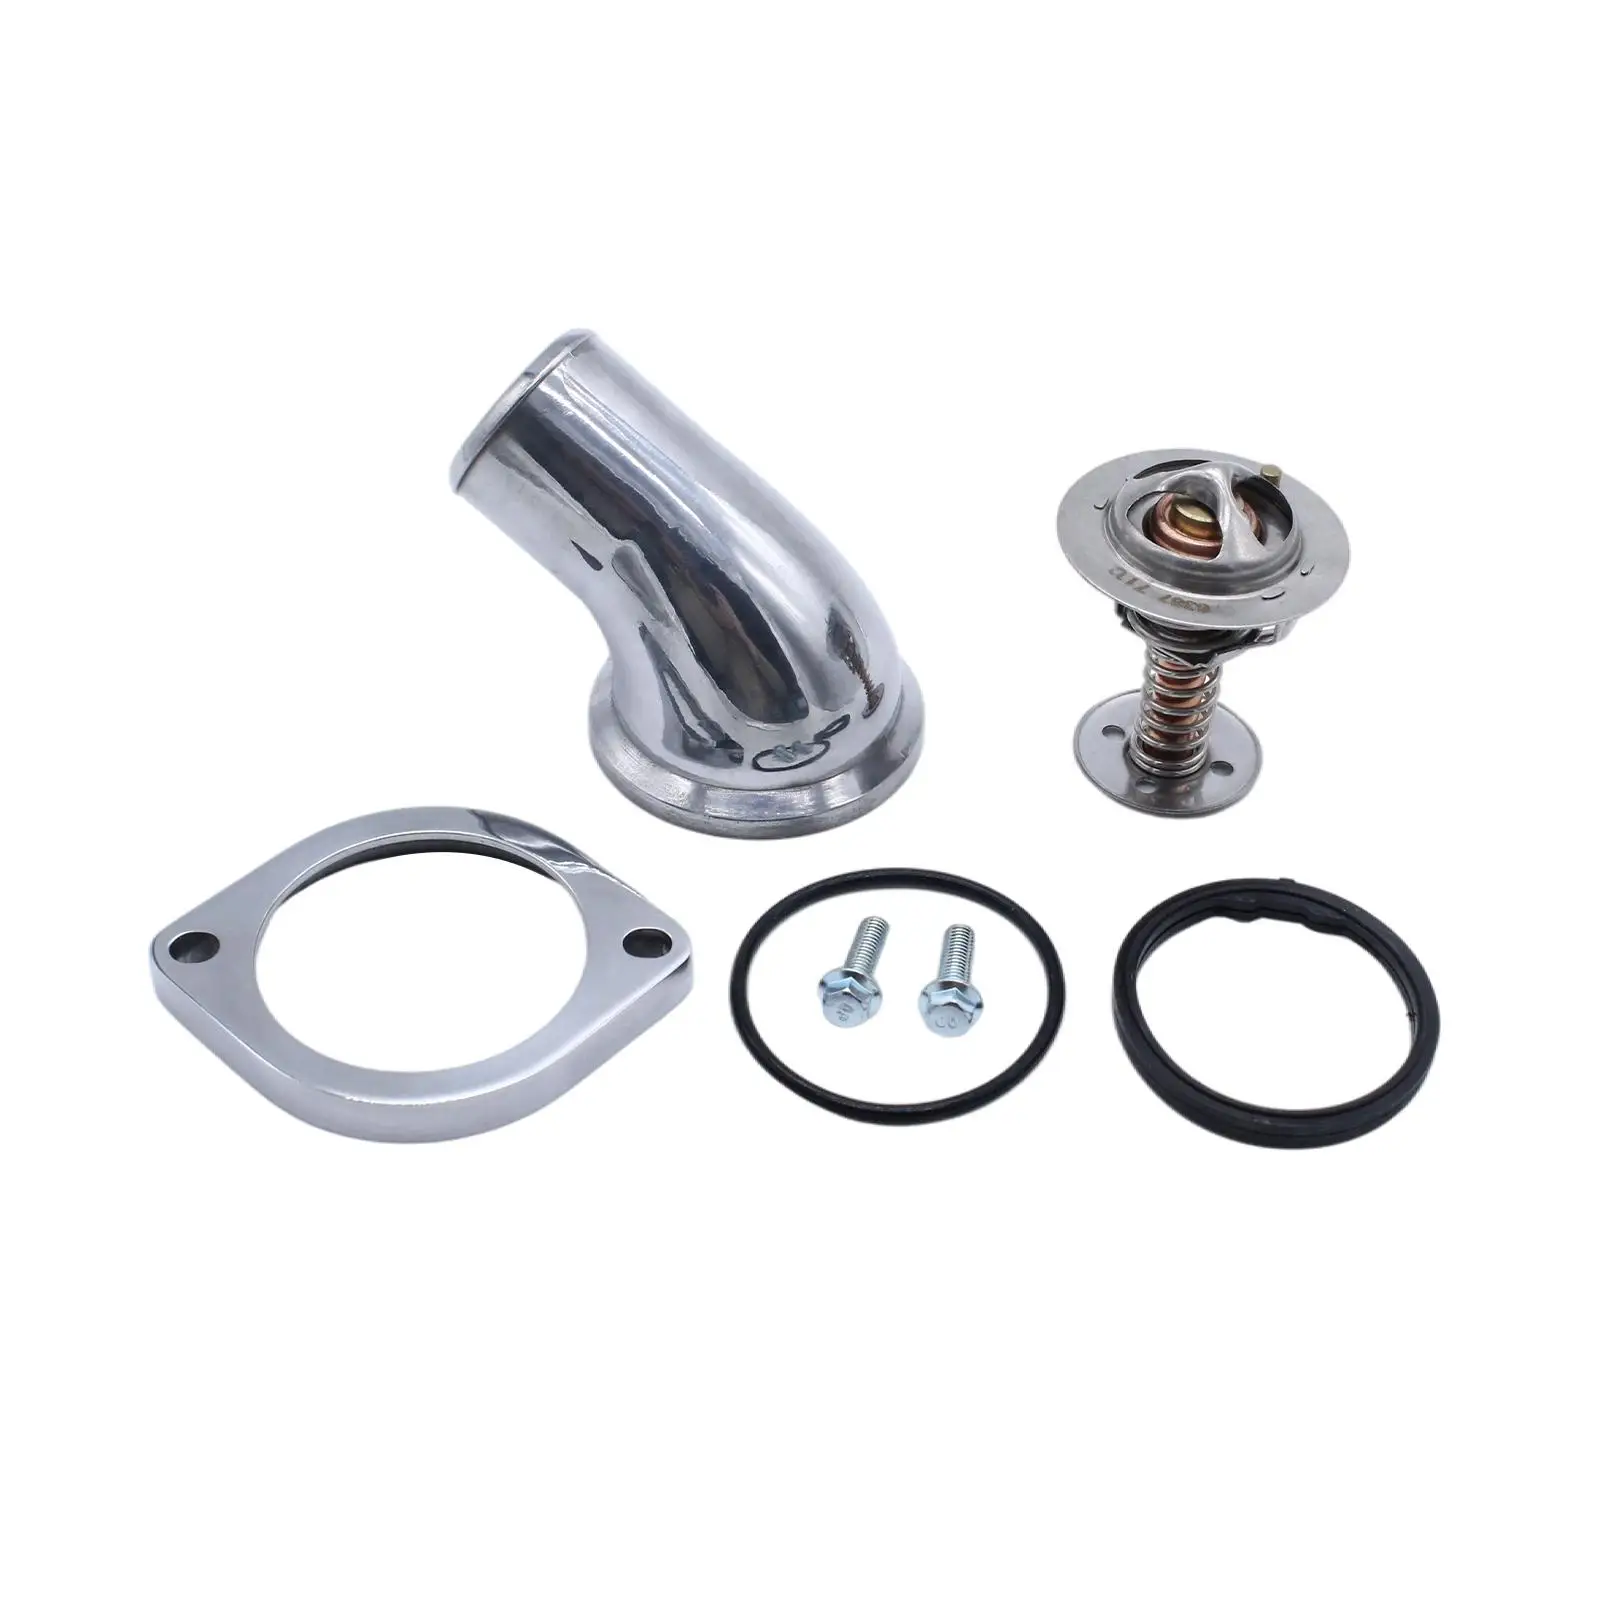 45° Swivel Water Neck Housing & Thermostat Fit for V8 (Ls-Based)